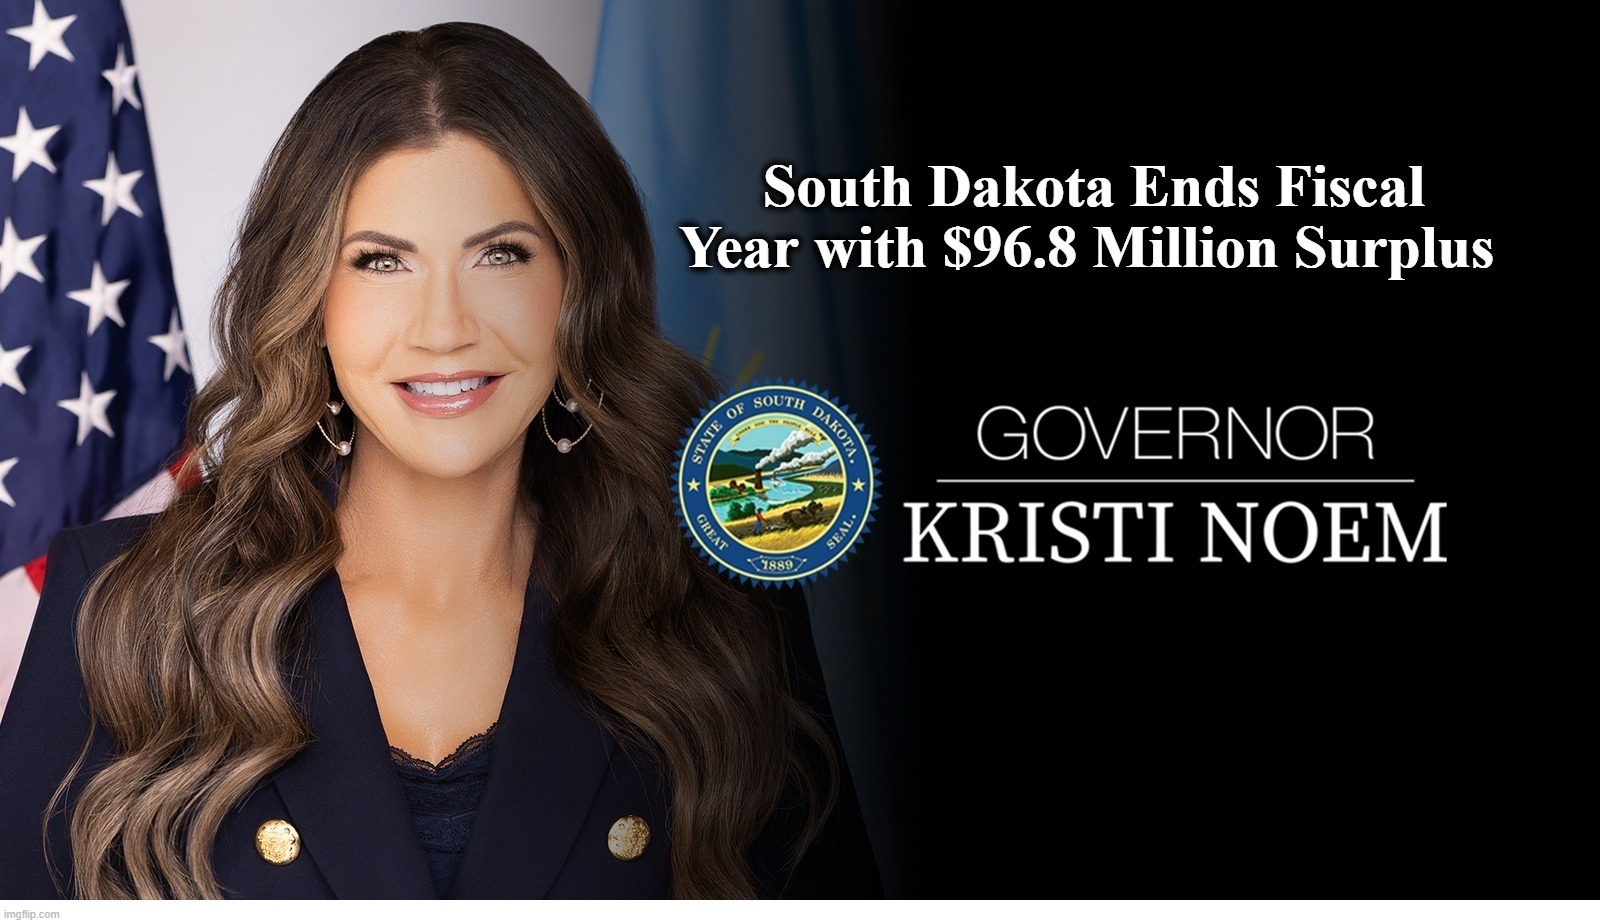 South Dakota Ends Fiscal Year with $96.8 Million Surplus | image tagged in south dakota,kristi noem,budget surplus,red state,liberal vs conservative,conservatism | made w/ Imgflip meme maker